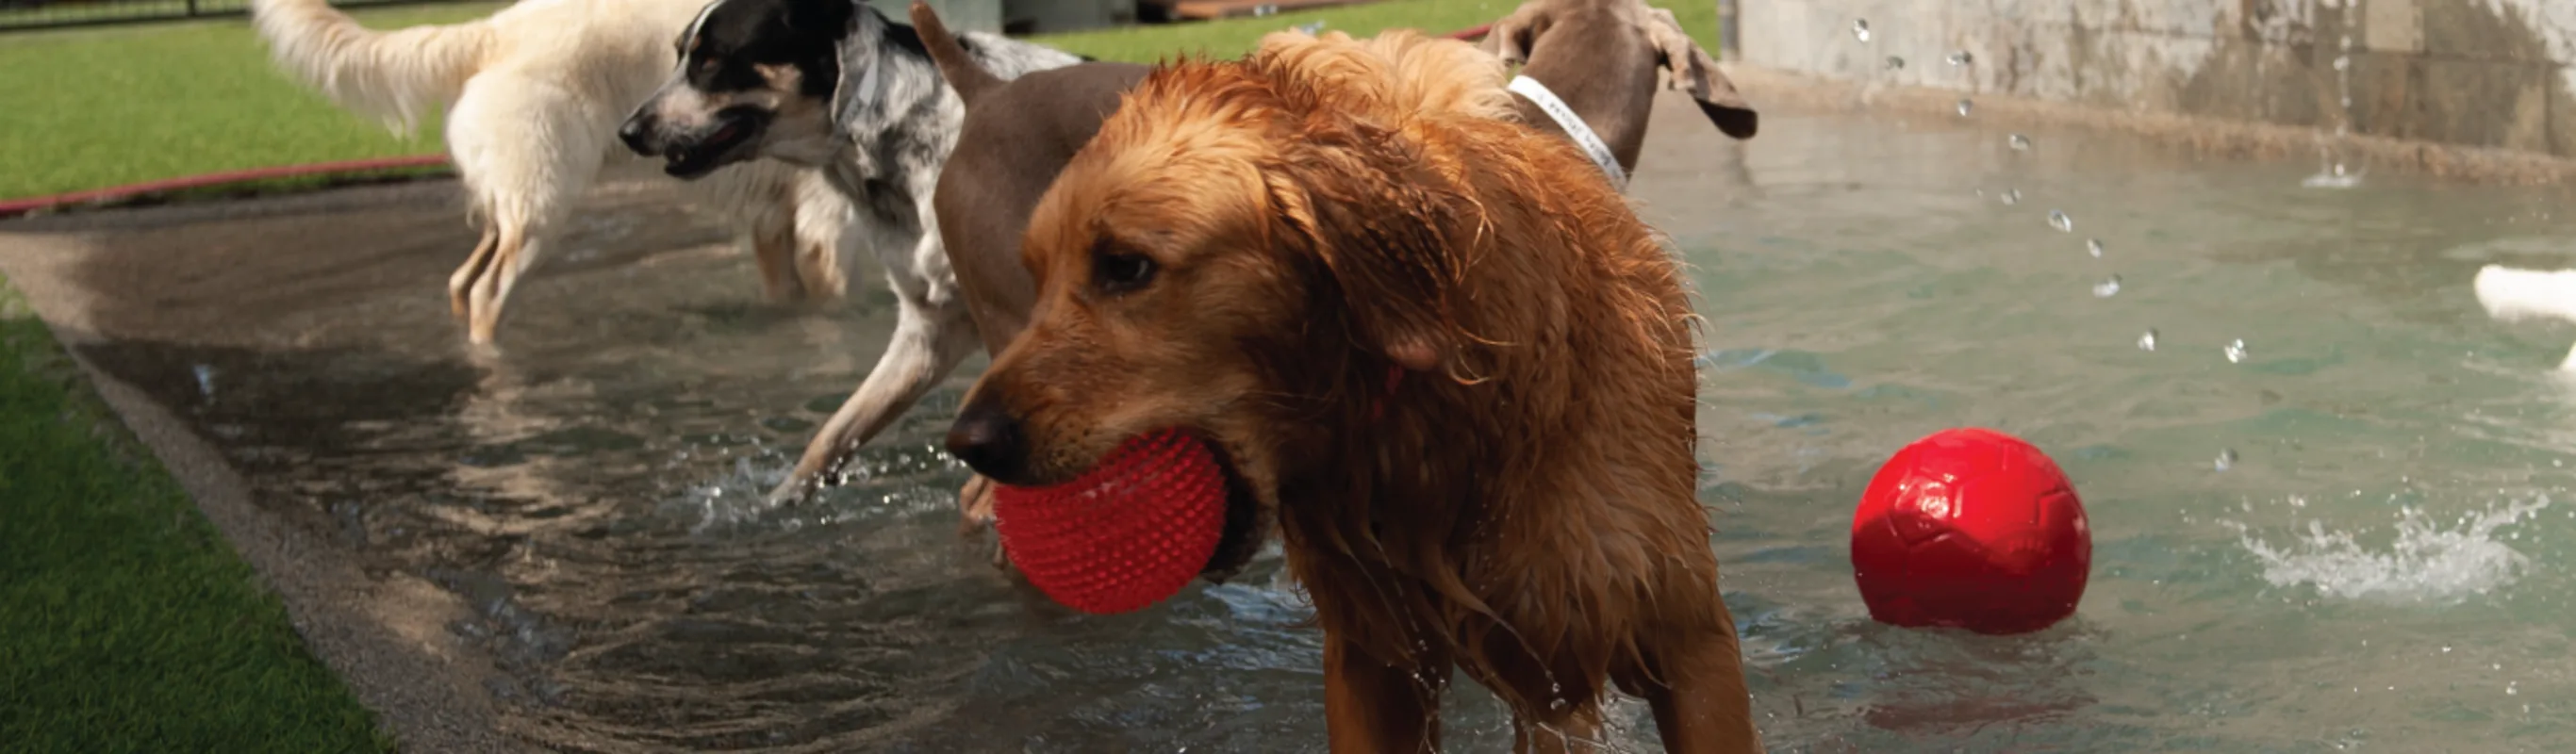 Dog in pool playing